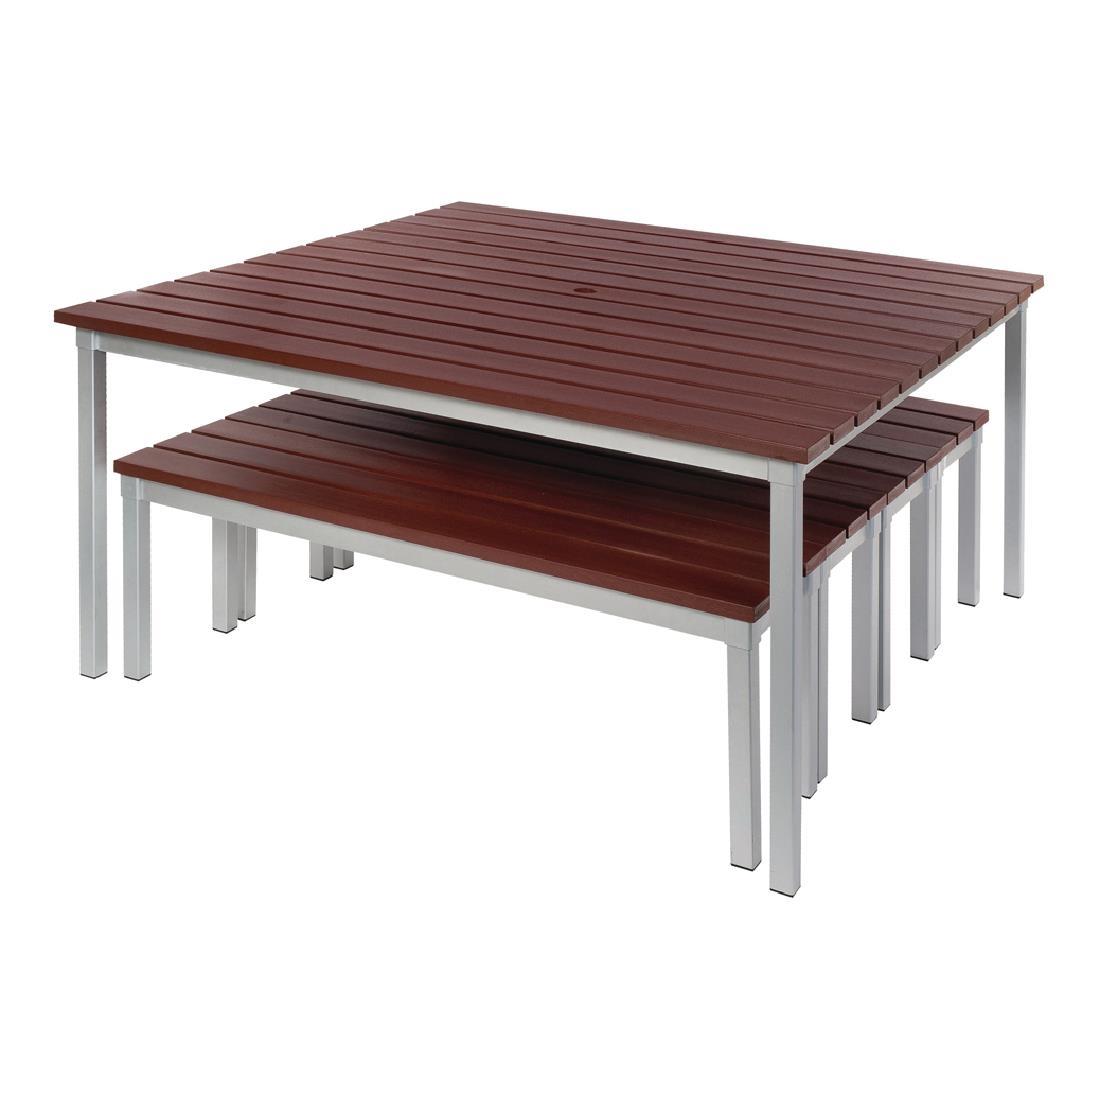 Enviro Square Outdoor Walnut Effect Faux Wood Table 1250mm - CK811  - 3